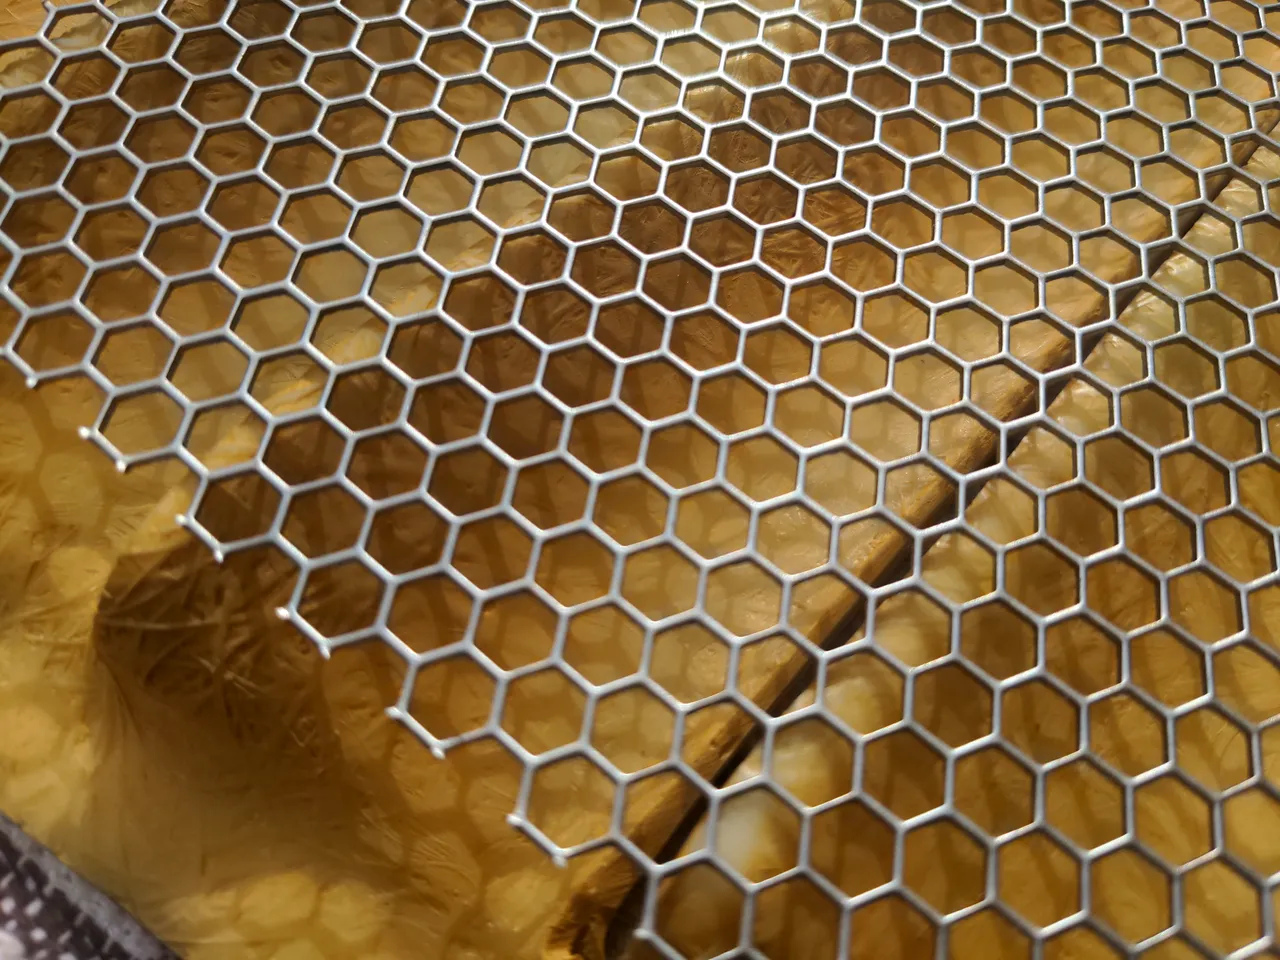 Some steel mesh with hexagonal perforations. The gaps between the hexagonal holes are about 1.5mm and the holes are about 7mm wide.